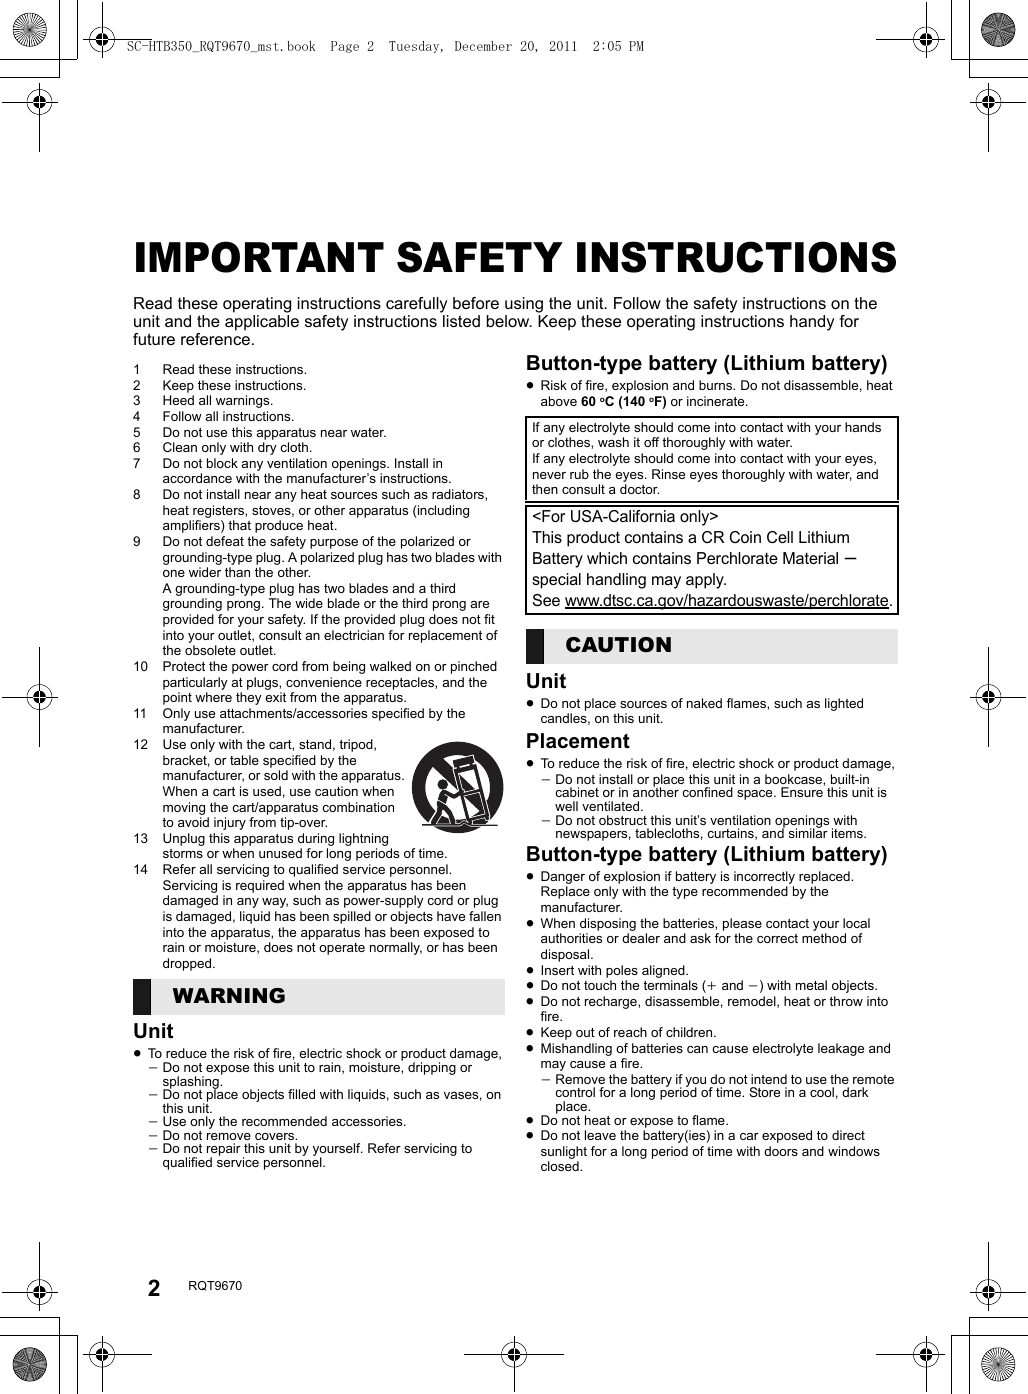 2RQT9670Table of contentsIMPORTANT SAFETY INSTRUCTIONSRead these operating instructions carefully before using the unit. Follow the safety instructions on the unit and the applicable safety instructions listed below. Keep these operating instructions handy for future reference.1 Read these instructions.2 Keep these instructions.3 Heed all warnings.4 Follow all instructions.5 Do not use this apparatus near water.6 Clean only with dry cloth.7 Do not block any ventilation openings. Install in accordance with the manufacturer’s instructions.8 Do not install near any heat sources such as radiators, heat registers, stoves, or other apparatus (including amplifiers) that produce heat.9 Do not defeat the safety purpose of the polarized or grounding-type plug. A polarized plug has two blades with one wider than the other. A grounding-type plug has two blades and a third grounding prong. The wide blade or the third prong are provided for your safety. If the provided plug does not fit into your outlet, consult an electrician for replacement of the obsolete outlet.10 Protect the power cord from being walked on or pinched particularly at plugs, convenience receptacles, and the point where they exit from the apparatus.11 Only use attachments/accessories specified by the manufacturer.12 Use only with the cart, stand, tripod, bracket, or table specified by the manufacturer, or sold with the apparatus. When a cart is used, use caution when moving the cart/apparatus combination to avoid injury from tip-over.13 Unplug this apparatus during lightning storms or when unused for long periods of time.14 Refer all servicing to qualified service personnel. Servicing is required when the apparatus has been damaged in any way, such as power-supply cord or plug is damaged, liquid has been spilled or objects have fallen into the apparatus, the apparatus has been exposed to rain or moisture, does not operate normally, or has been dropped.Unit≥To reduce the risk of fire, electric shock or product damage,jDo not expose this unit to rain, moisture, dripping or splashing.jDo not place objects filled with liquids, such as vases, on this unit.jUse only the recommended accessories.jDo not remove covers.jDo not repair this unit by yourself. Refer servicing to qualified service personnel.Button-type battery (Lithium battery)≥Risk of fire, explosion and burns. Do not disassemble, heat above 60 oC (140 oF) or incinerate.Unit≥Do not place sources of naked flames, such as lighted candles, on this unit.Placement≥To reduce the risk of fire, electric shock or product damage,jDo not install or place this unit in a bookcase, built-in cabinet or in another confined space. Ensure this unit is well ventilated.jDo not obstruct this unit’s ventilation openings with newspapers, tablecloths, curtains, and similar items.Button-type battery (Lithium battery)≥Danger of explosion if battery is incorrectly replaced. Replace only with the type recommended by the manufacturer.≥When disposing the batteries, please contact your local authorities or dealer and ask for the correct method of disposal.≥Insert with poles aligned.≥Do not touch the terminals (i and j) with metal objects.≥Do not recharge, disassemble, remodel, heat or throw into fire.≥Keep out of reach of children.≥Mishandling of batteries can cause electrolyte leakage and may cause a fire.jRemove the battery if you do not intend to use the remote control for a long period of time. Store in a cool, dark place.≥Do not heat or expose to flame.≥Do not leave the battery(ies) in a car exposed to direct sunlight for a long period of time with doors and windows closed.WARNINGIf any electrolyte should come into contact with your hands or clothes, wash it off thoroughly with water.If any electrolyte should come into contact with your eyes, never rub the eyes. Rinse eyes thoroughly with water, and then consult a doctor.&lt;For USA-California only&gt;This product contains a CR Coin Cell Lithium Battery which contains Perchlorate Material s special handling may apply.See www.dtsc.ca.gov/hazardouswaste/perchlorate.CAUTIONSC-HTB350_RQT9670_mst.book  Page 2  Tuesday, December 20, 2011  2:05 PM